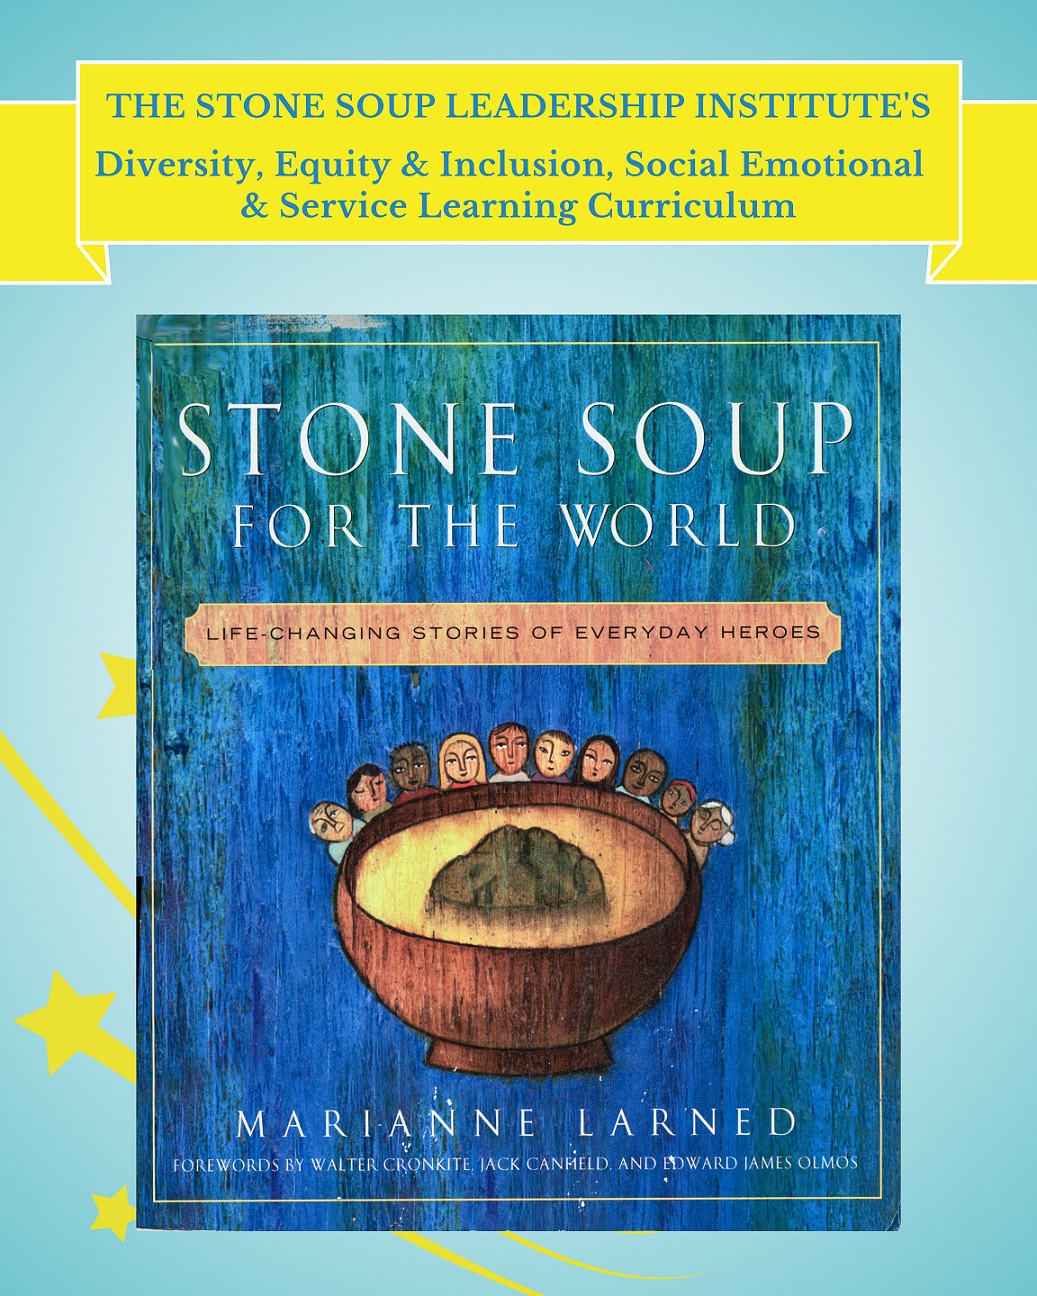 Diversity, Equity & Inclusion, Social Emotional Learning & Service Learning Curriculum